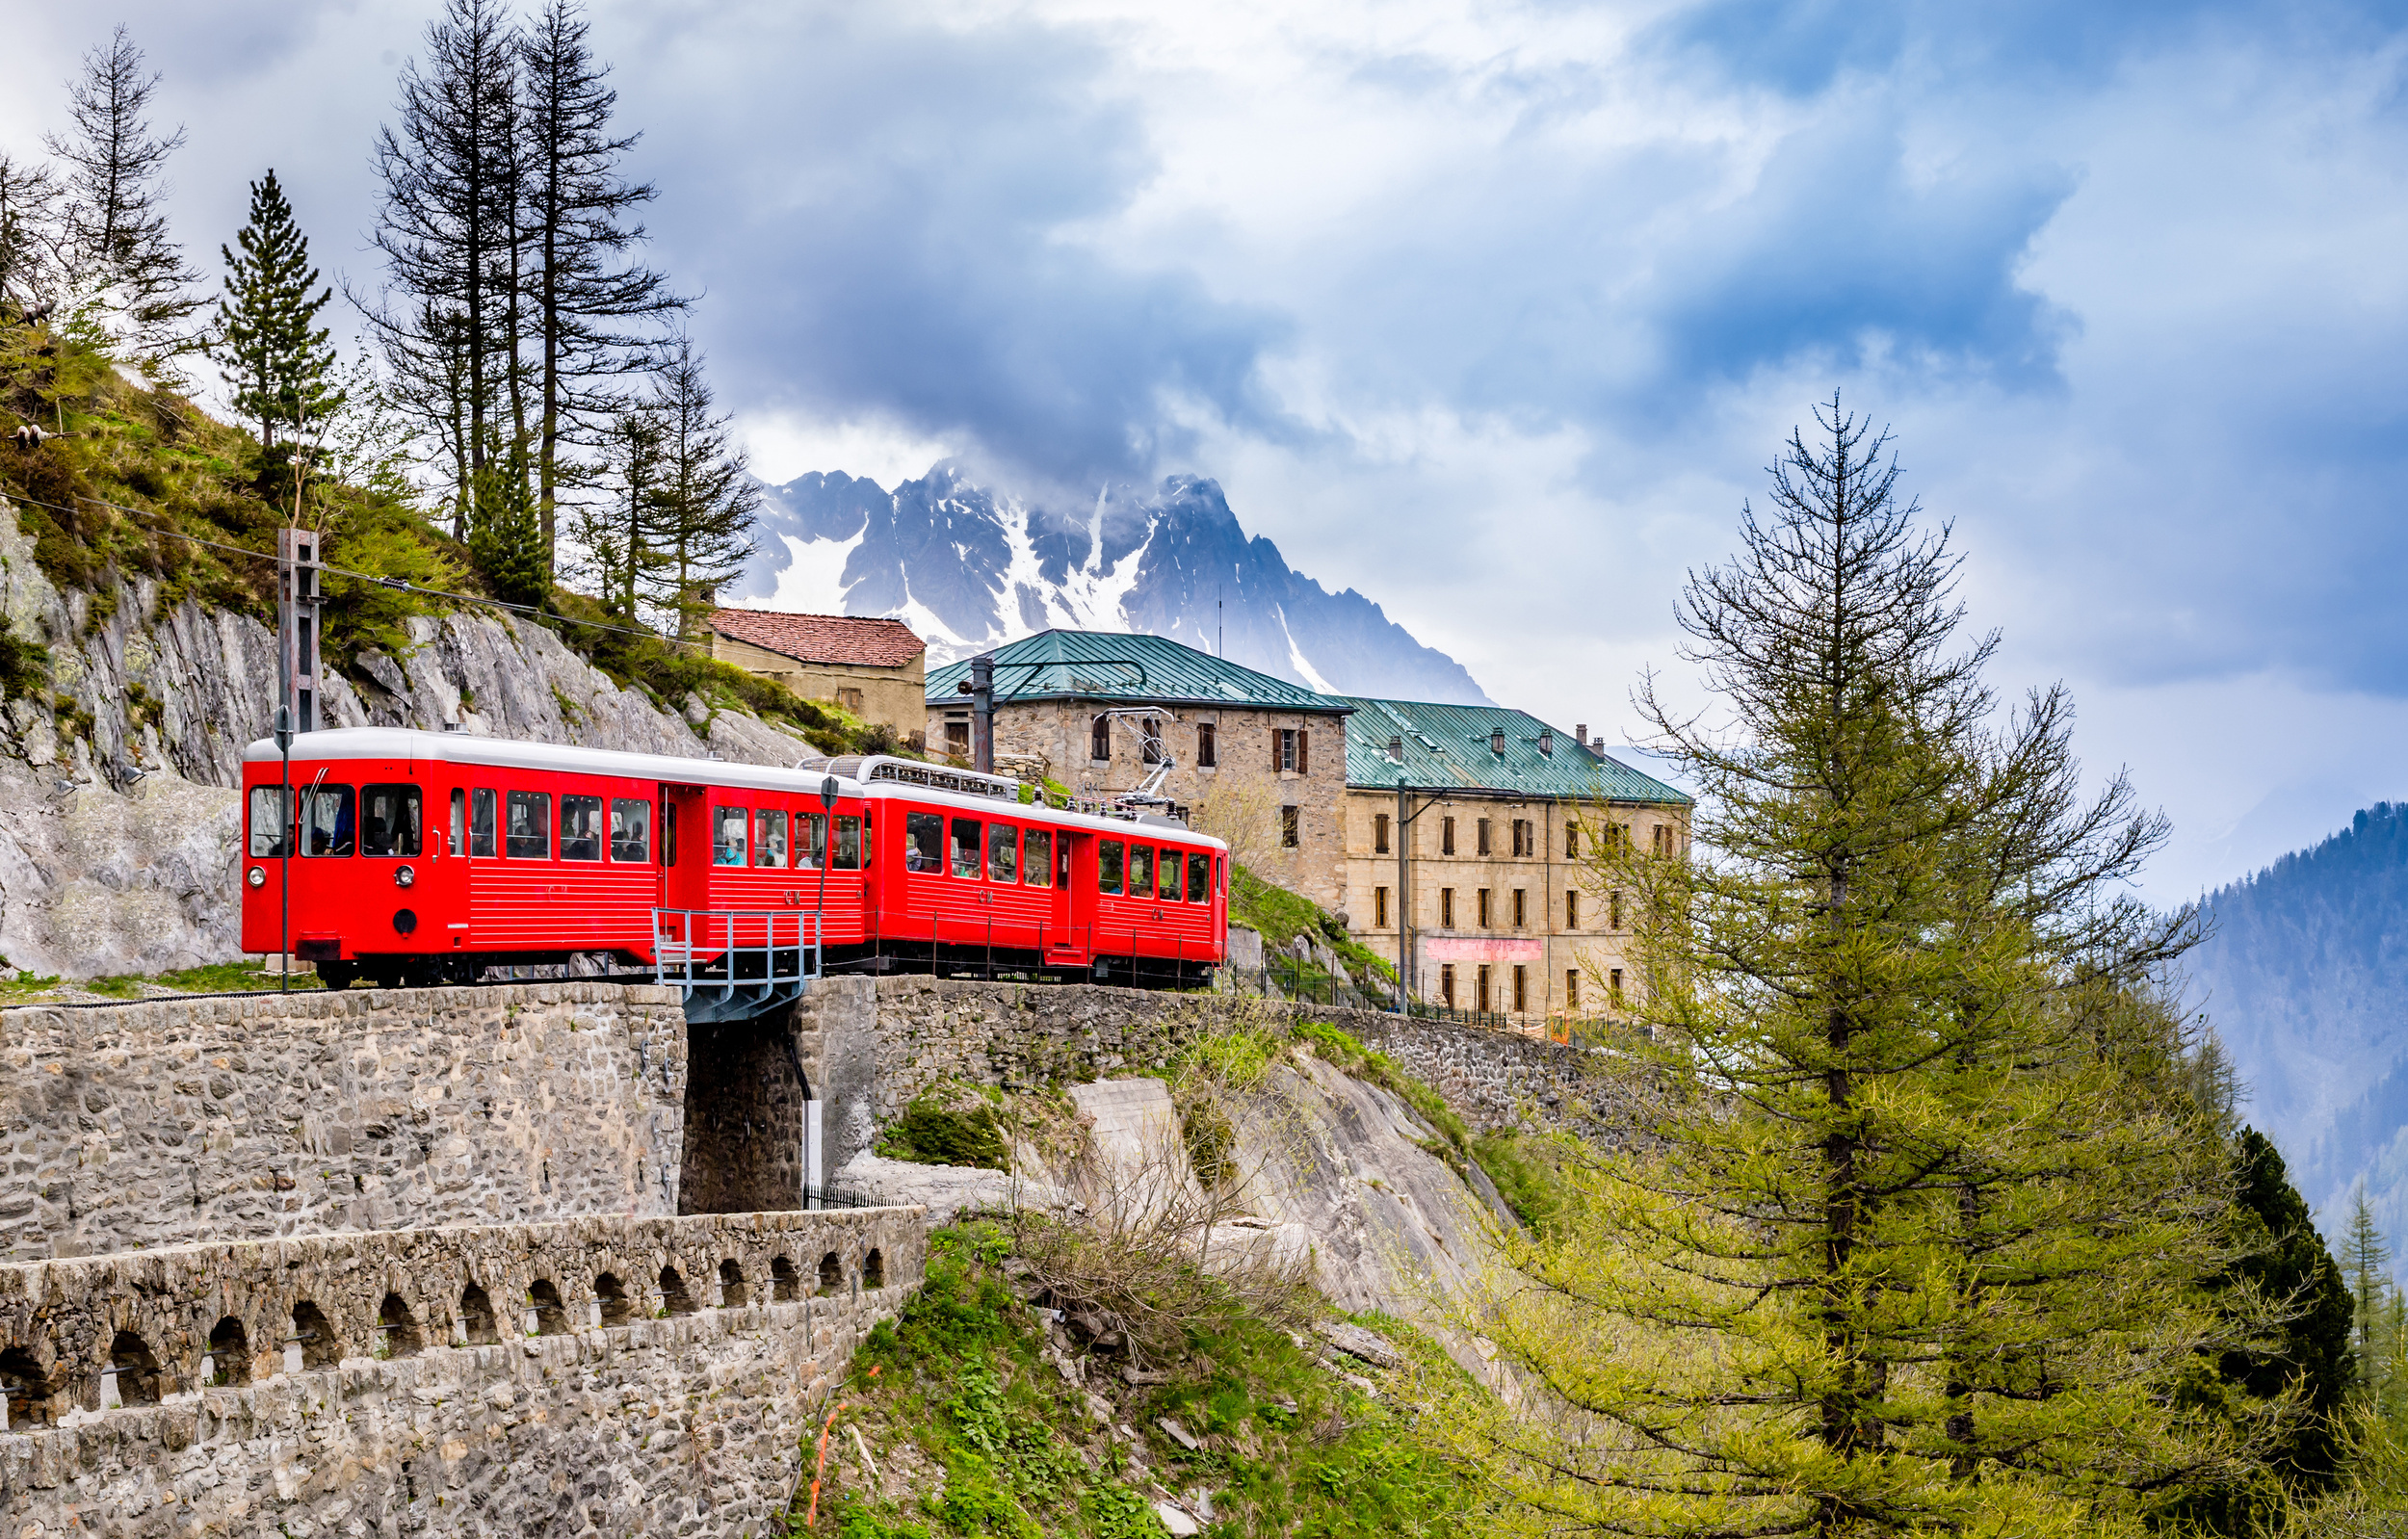 <p>Like its neighbor down south, the regional RER line through the French Alps is one of the best ways to see the mountains and villages. Relax in style and enjoy snowy peaks with a cup of hot chocolate aboard one of the many daily trains between alpine towns and cities.</p><p>You may also like: <a href='https://www.yardbarker.com/lifestyle/articles/mental_health_strategies_to_get_you_through_every_day/s1__34088402'>Mental health strategies to get you through every day</a></p>